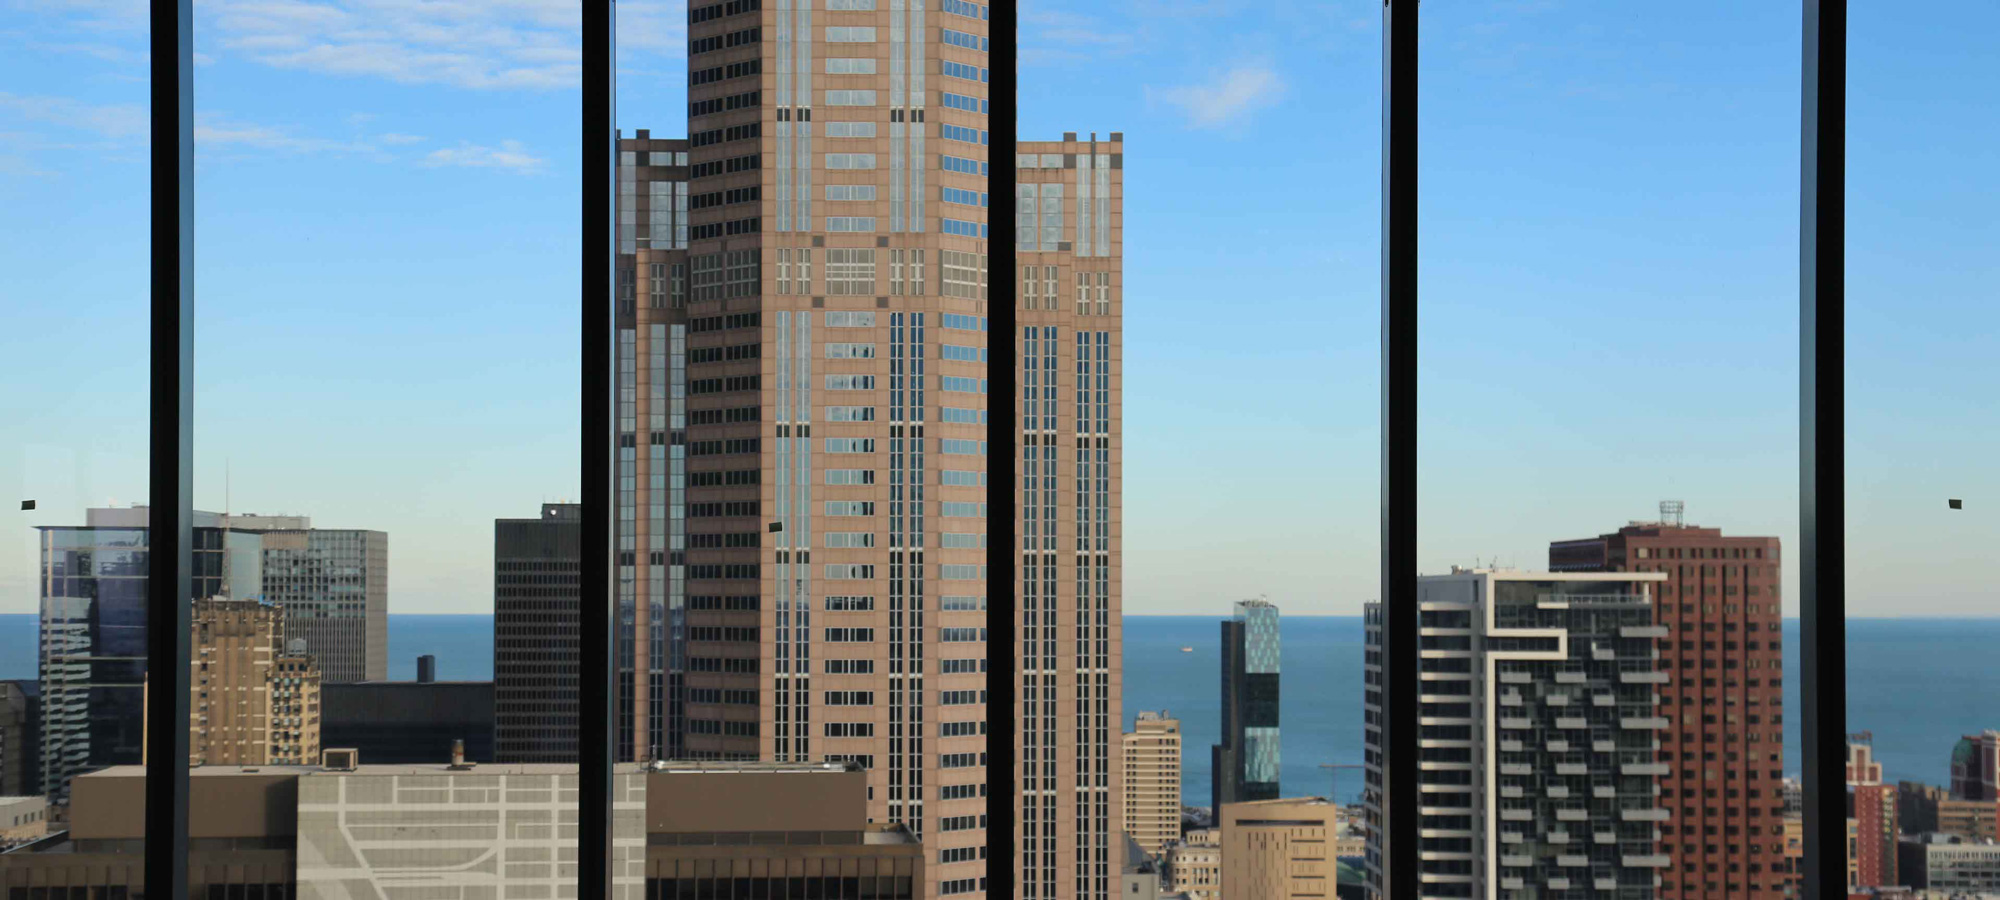 A window view of looking out a large cityscape in the afternoon